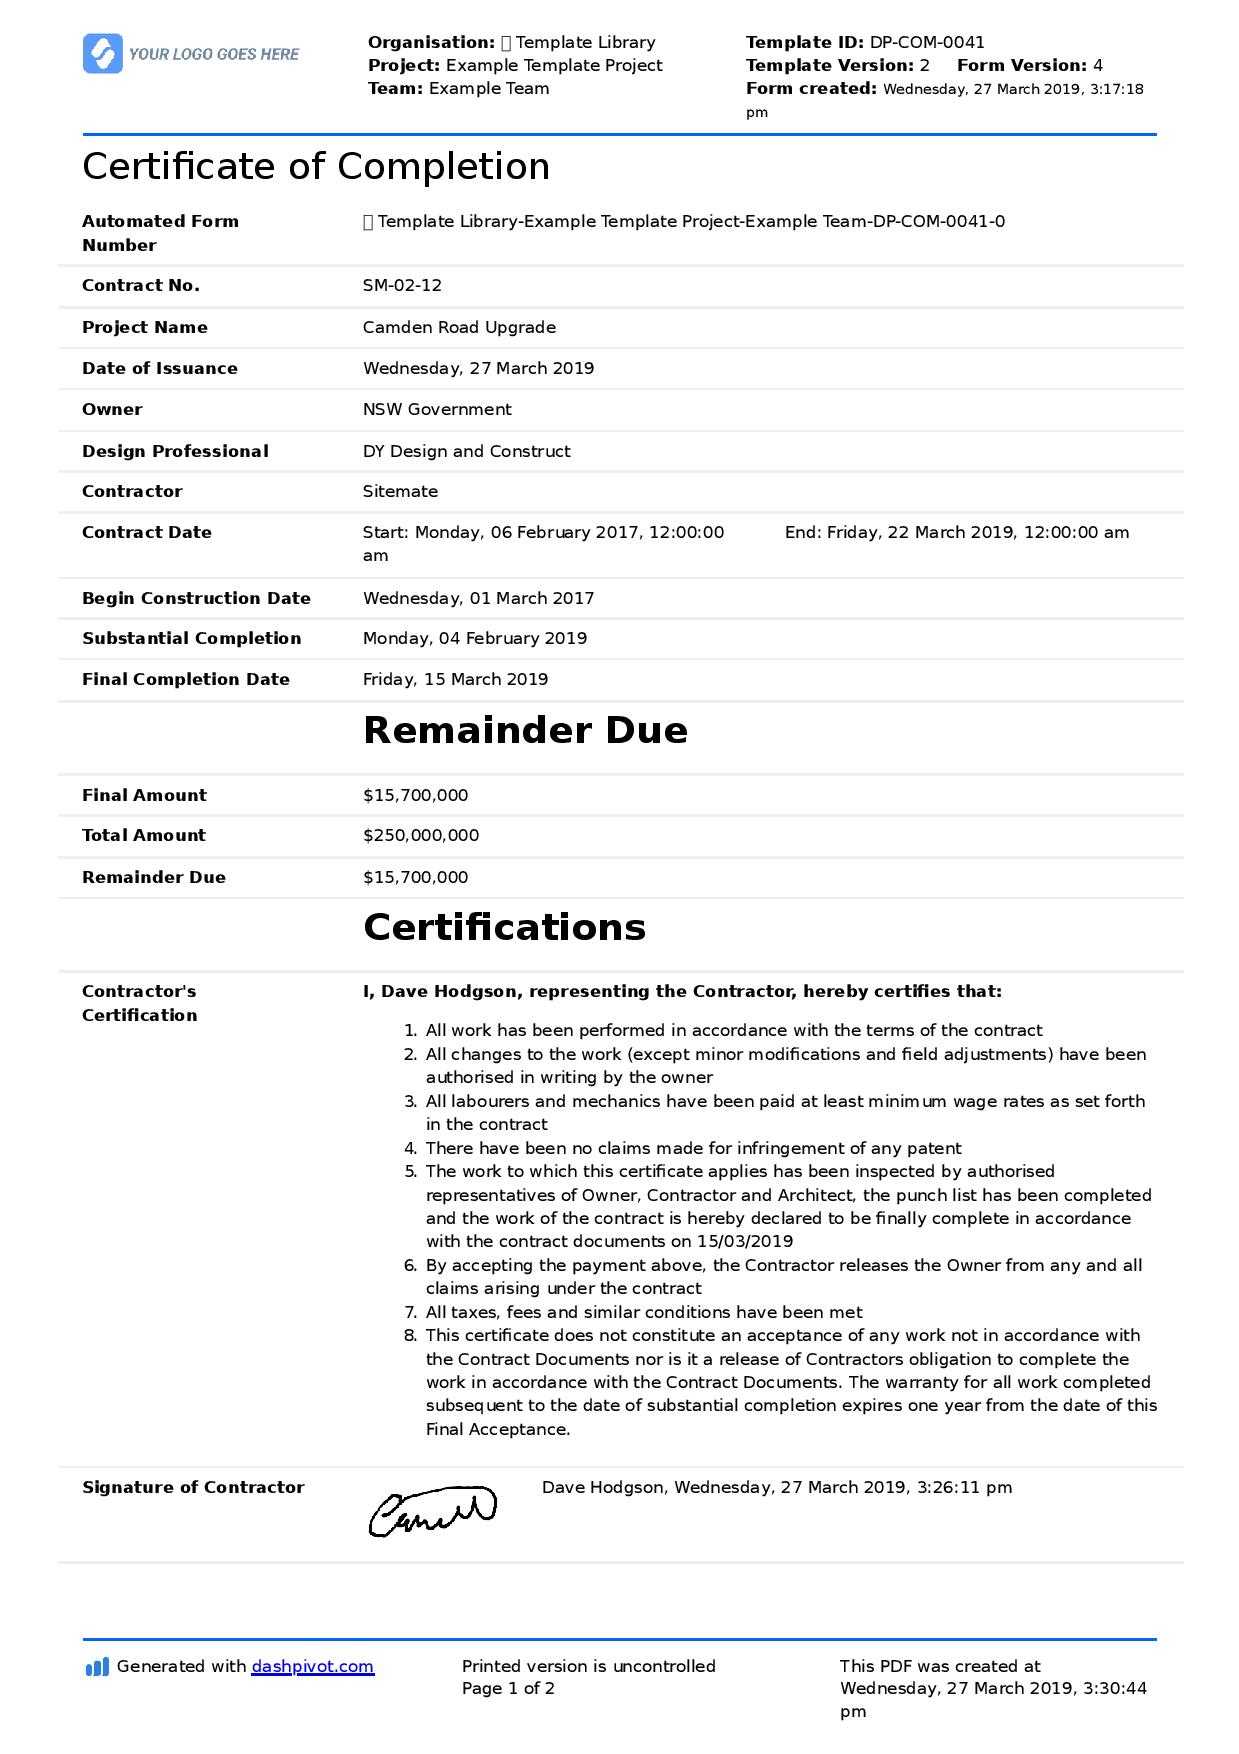 Certificate Of Completion For Construction (Free Template + Pertaining To Certificate Of Acceptance Template